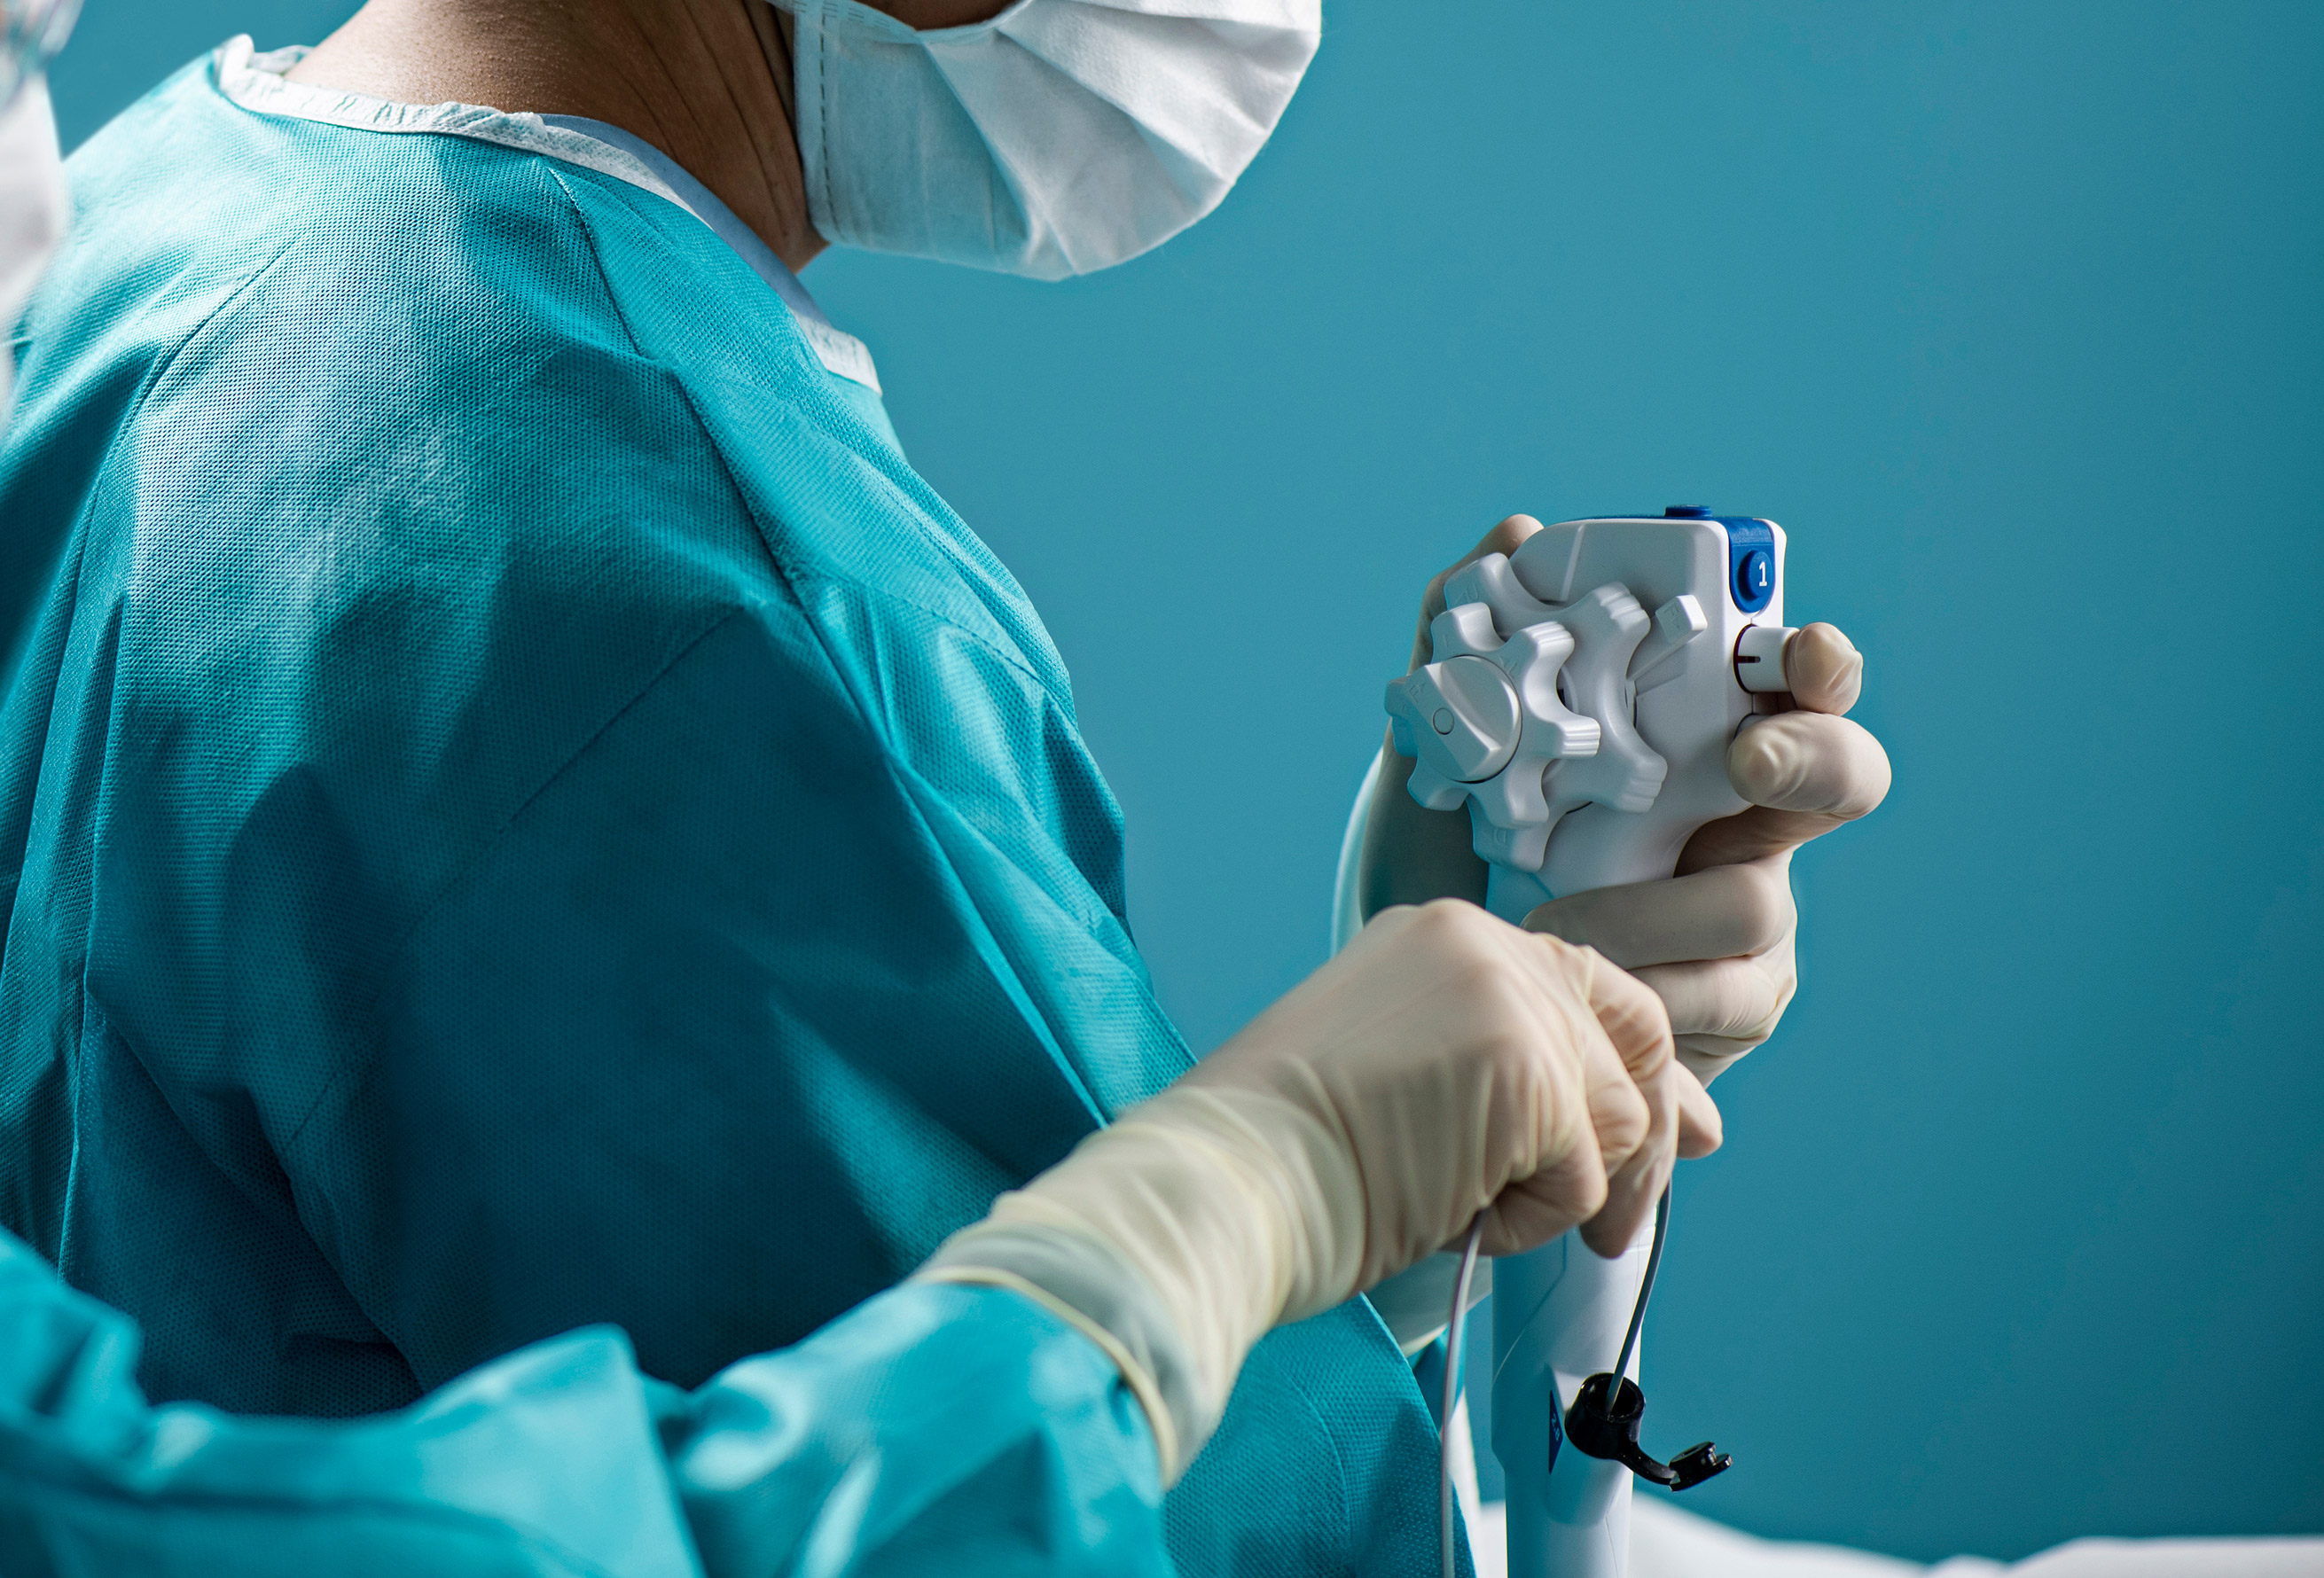 What Do Nurses and Technicians Think About Single-Use Endoscopes?